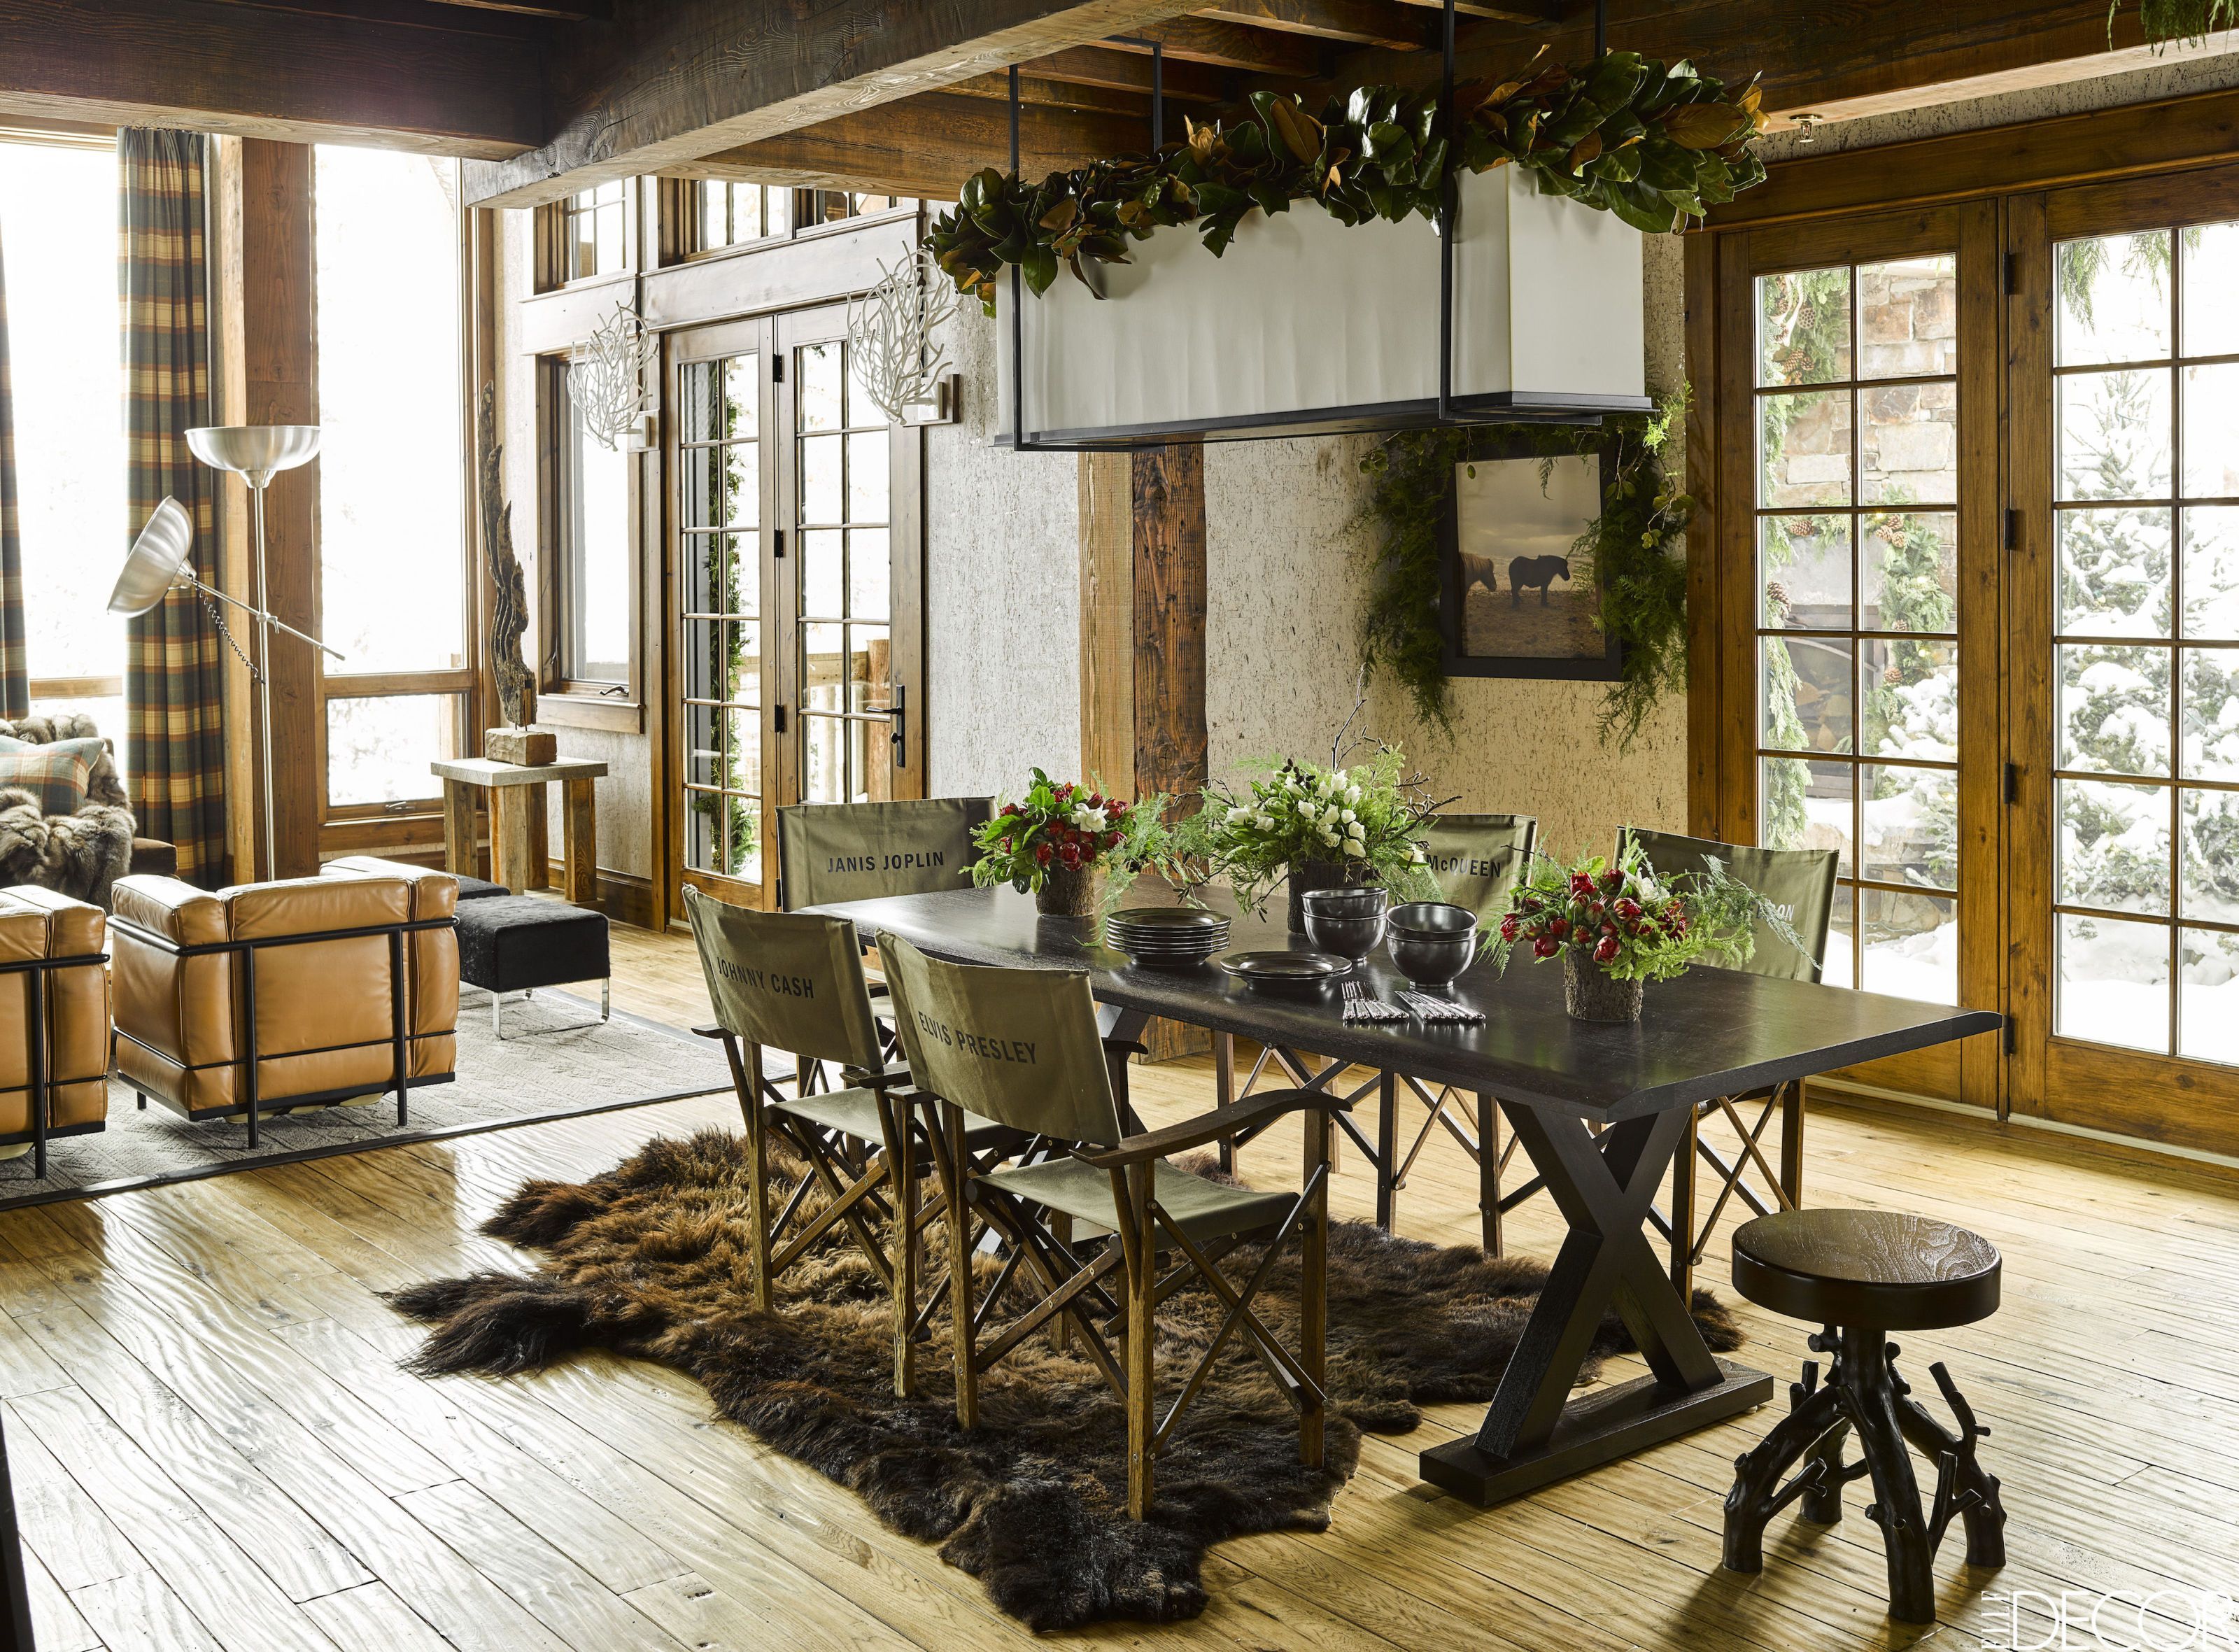 25 Rustic Dining Room Ideas - Farmhouse Style Dining Room Designs